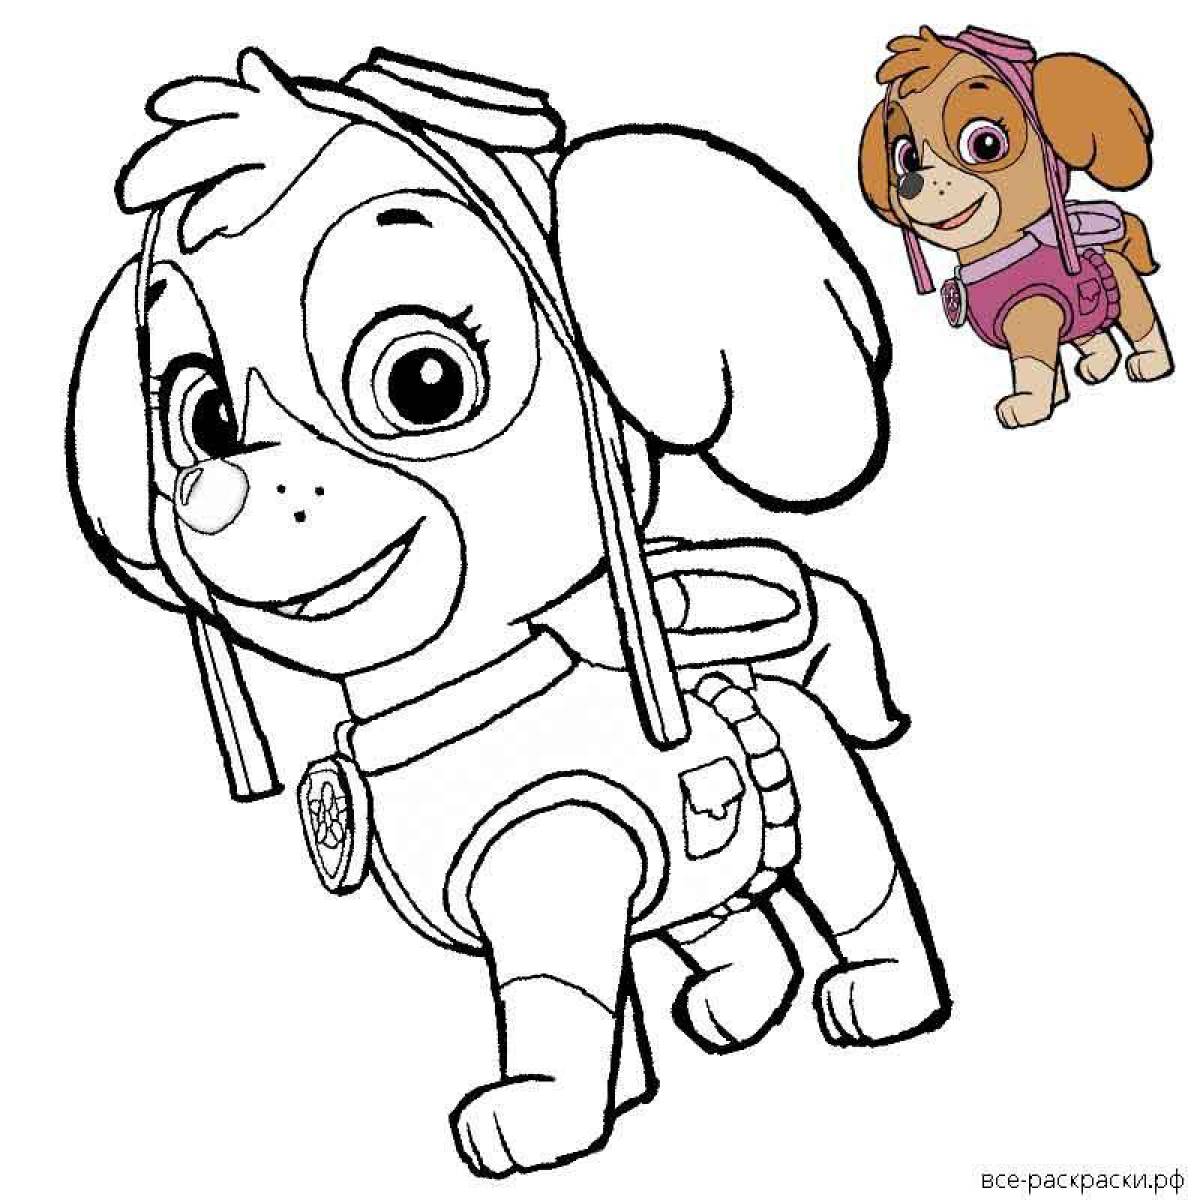 Colorful Paw Patrol coloring book for girls